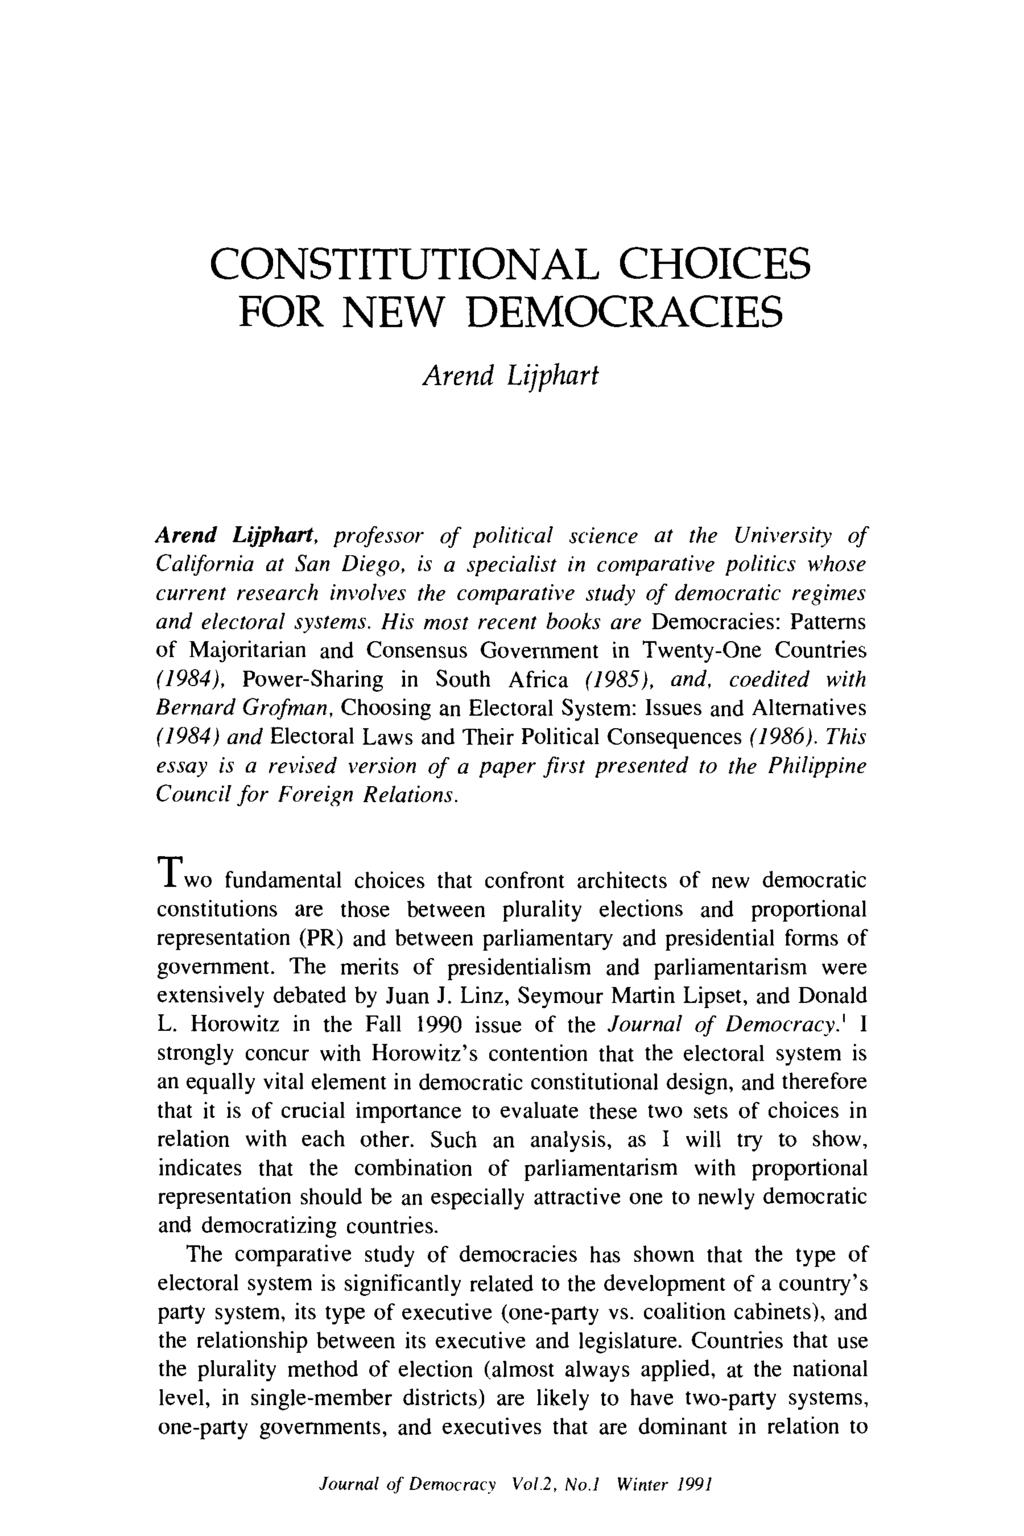 CONSTITUTIONAL CHOICES FOR NEW DEMOCRACIES Arend Lijphart Arend Lijphart, professor of political science at the University of California at San Diego, is a specialist in comparative politics whose